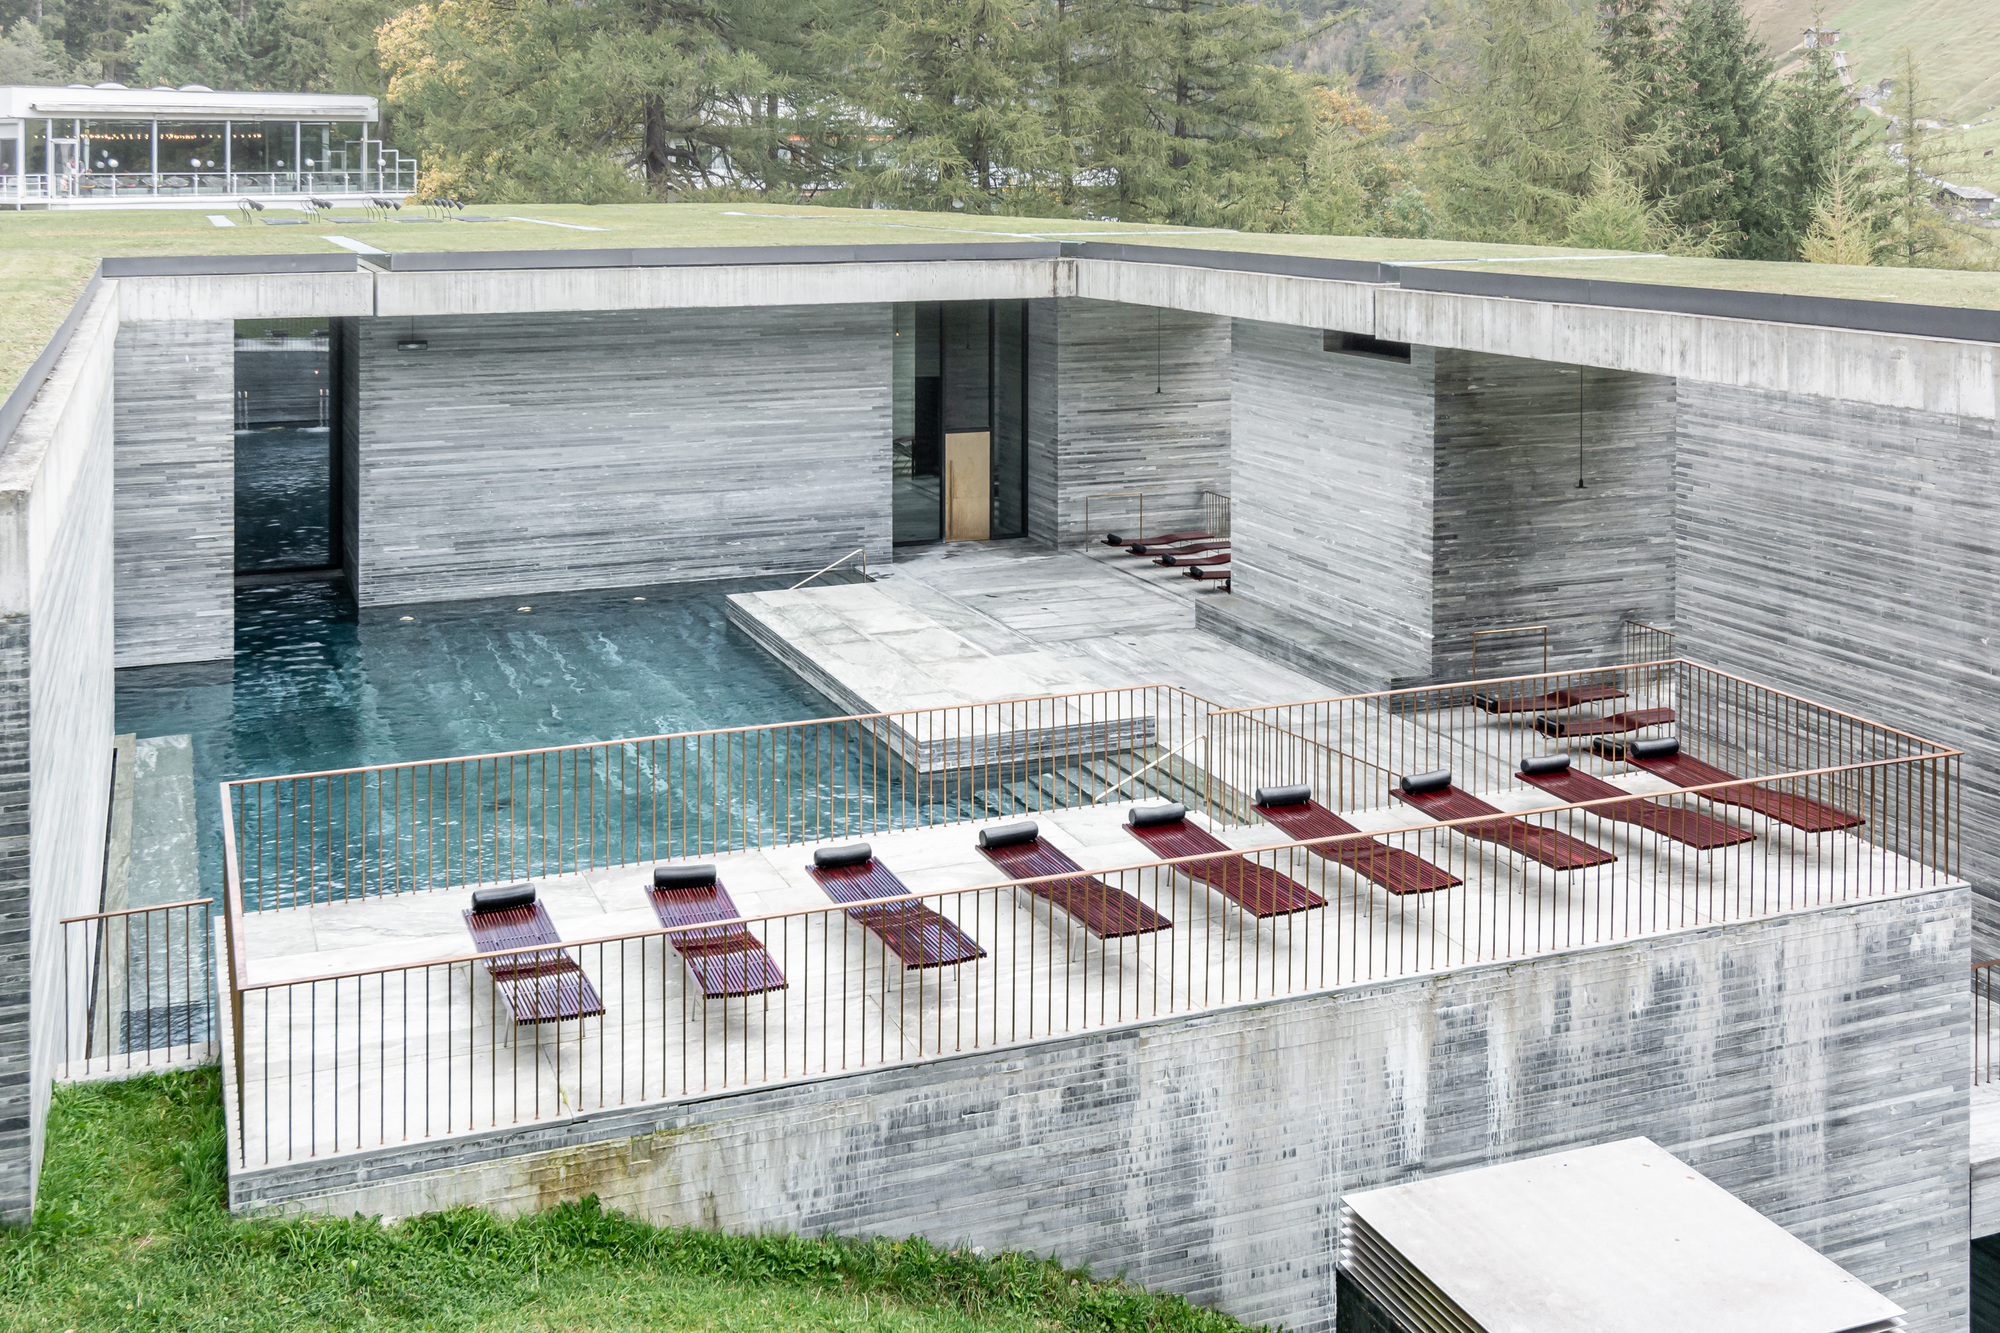 peter zumthor thermal baths